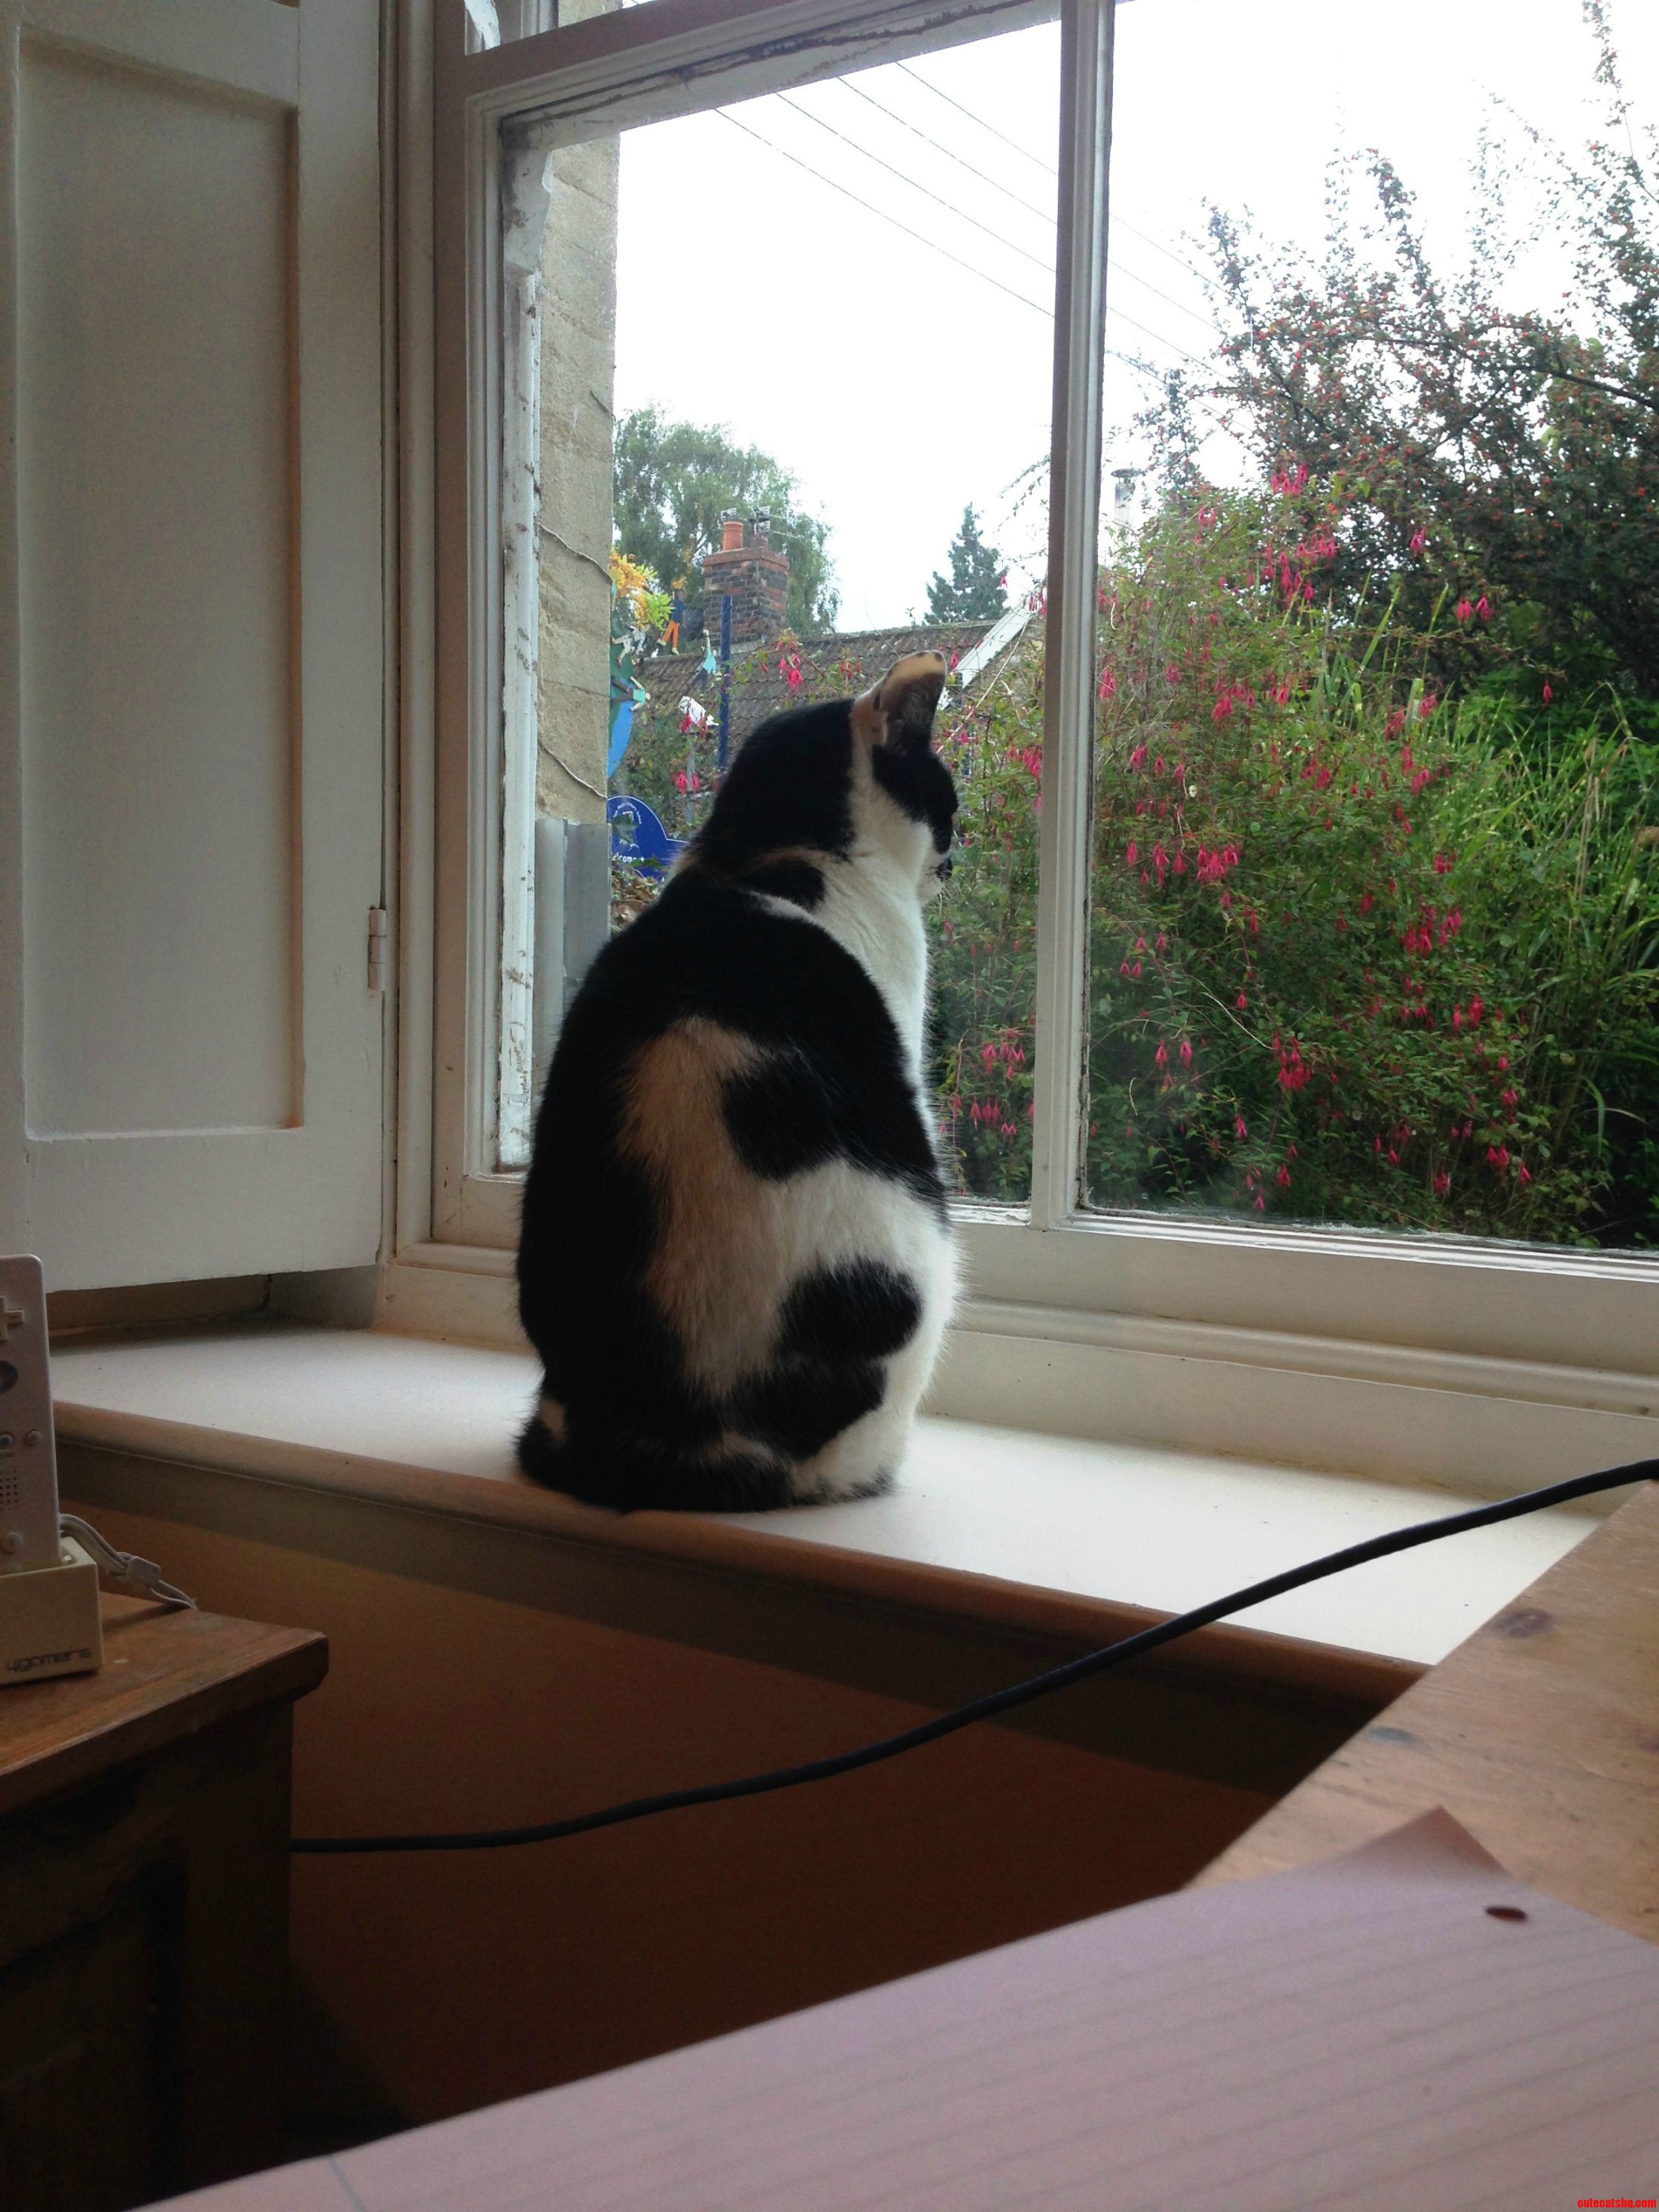 My Cat Looked Thoughtful This Morning…